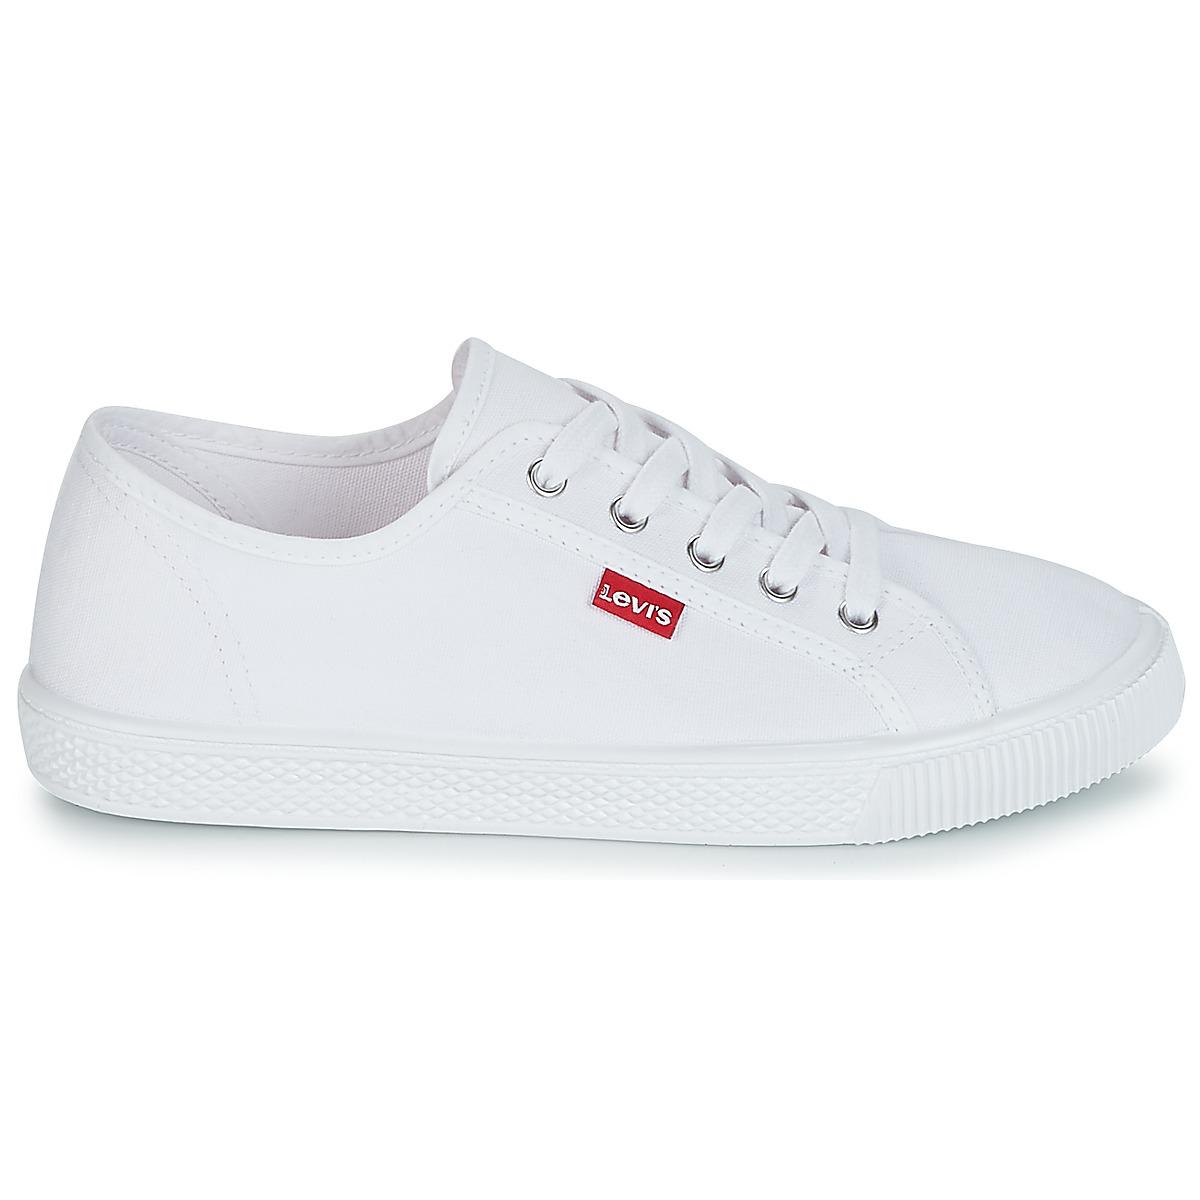 Sneakers - Levi's Unisex Malibu Beach S Regular White Sneakers - Size UK/SA   was sold for  on 15 Jan at 23:16 by JBInternational in  Johannesburg (ID:453523655)